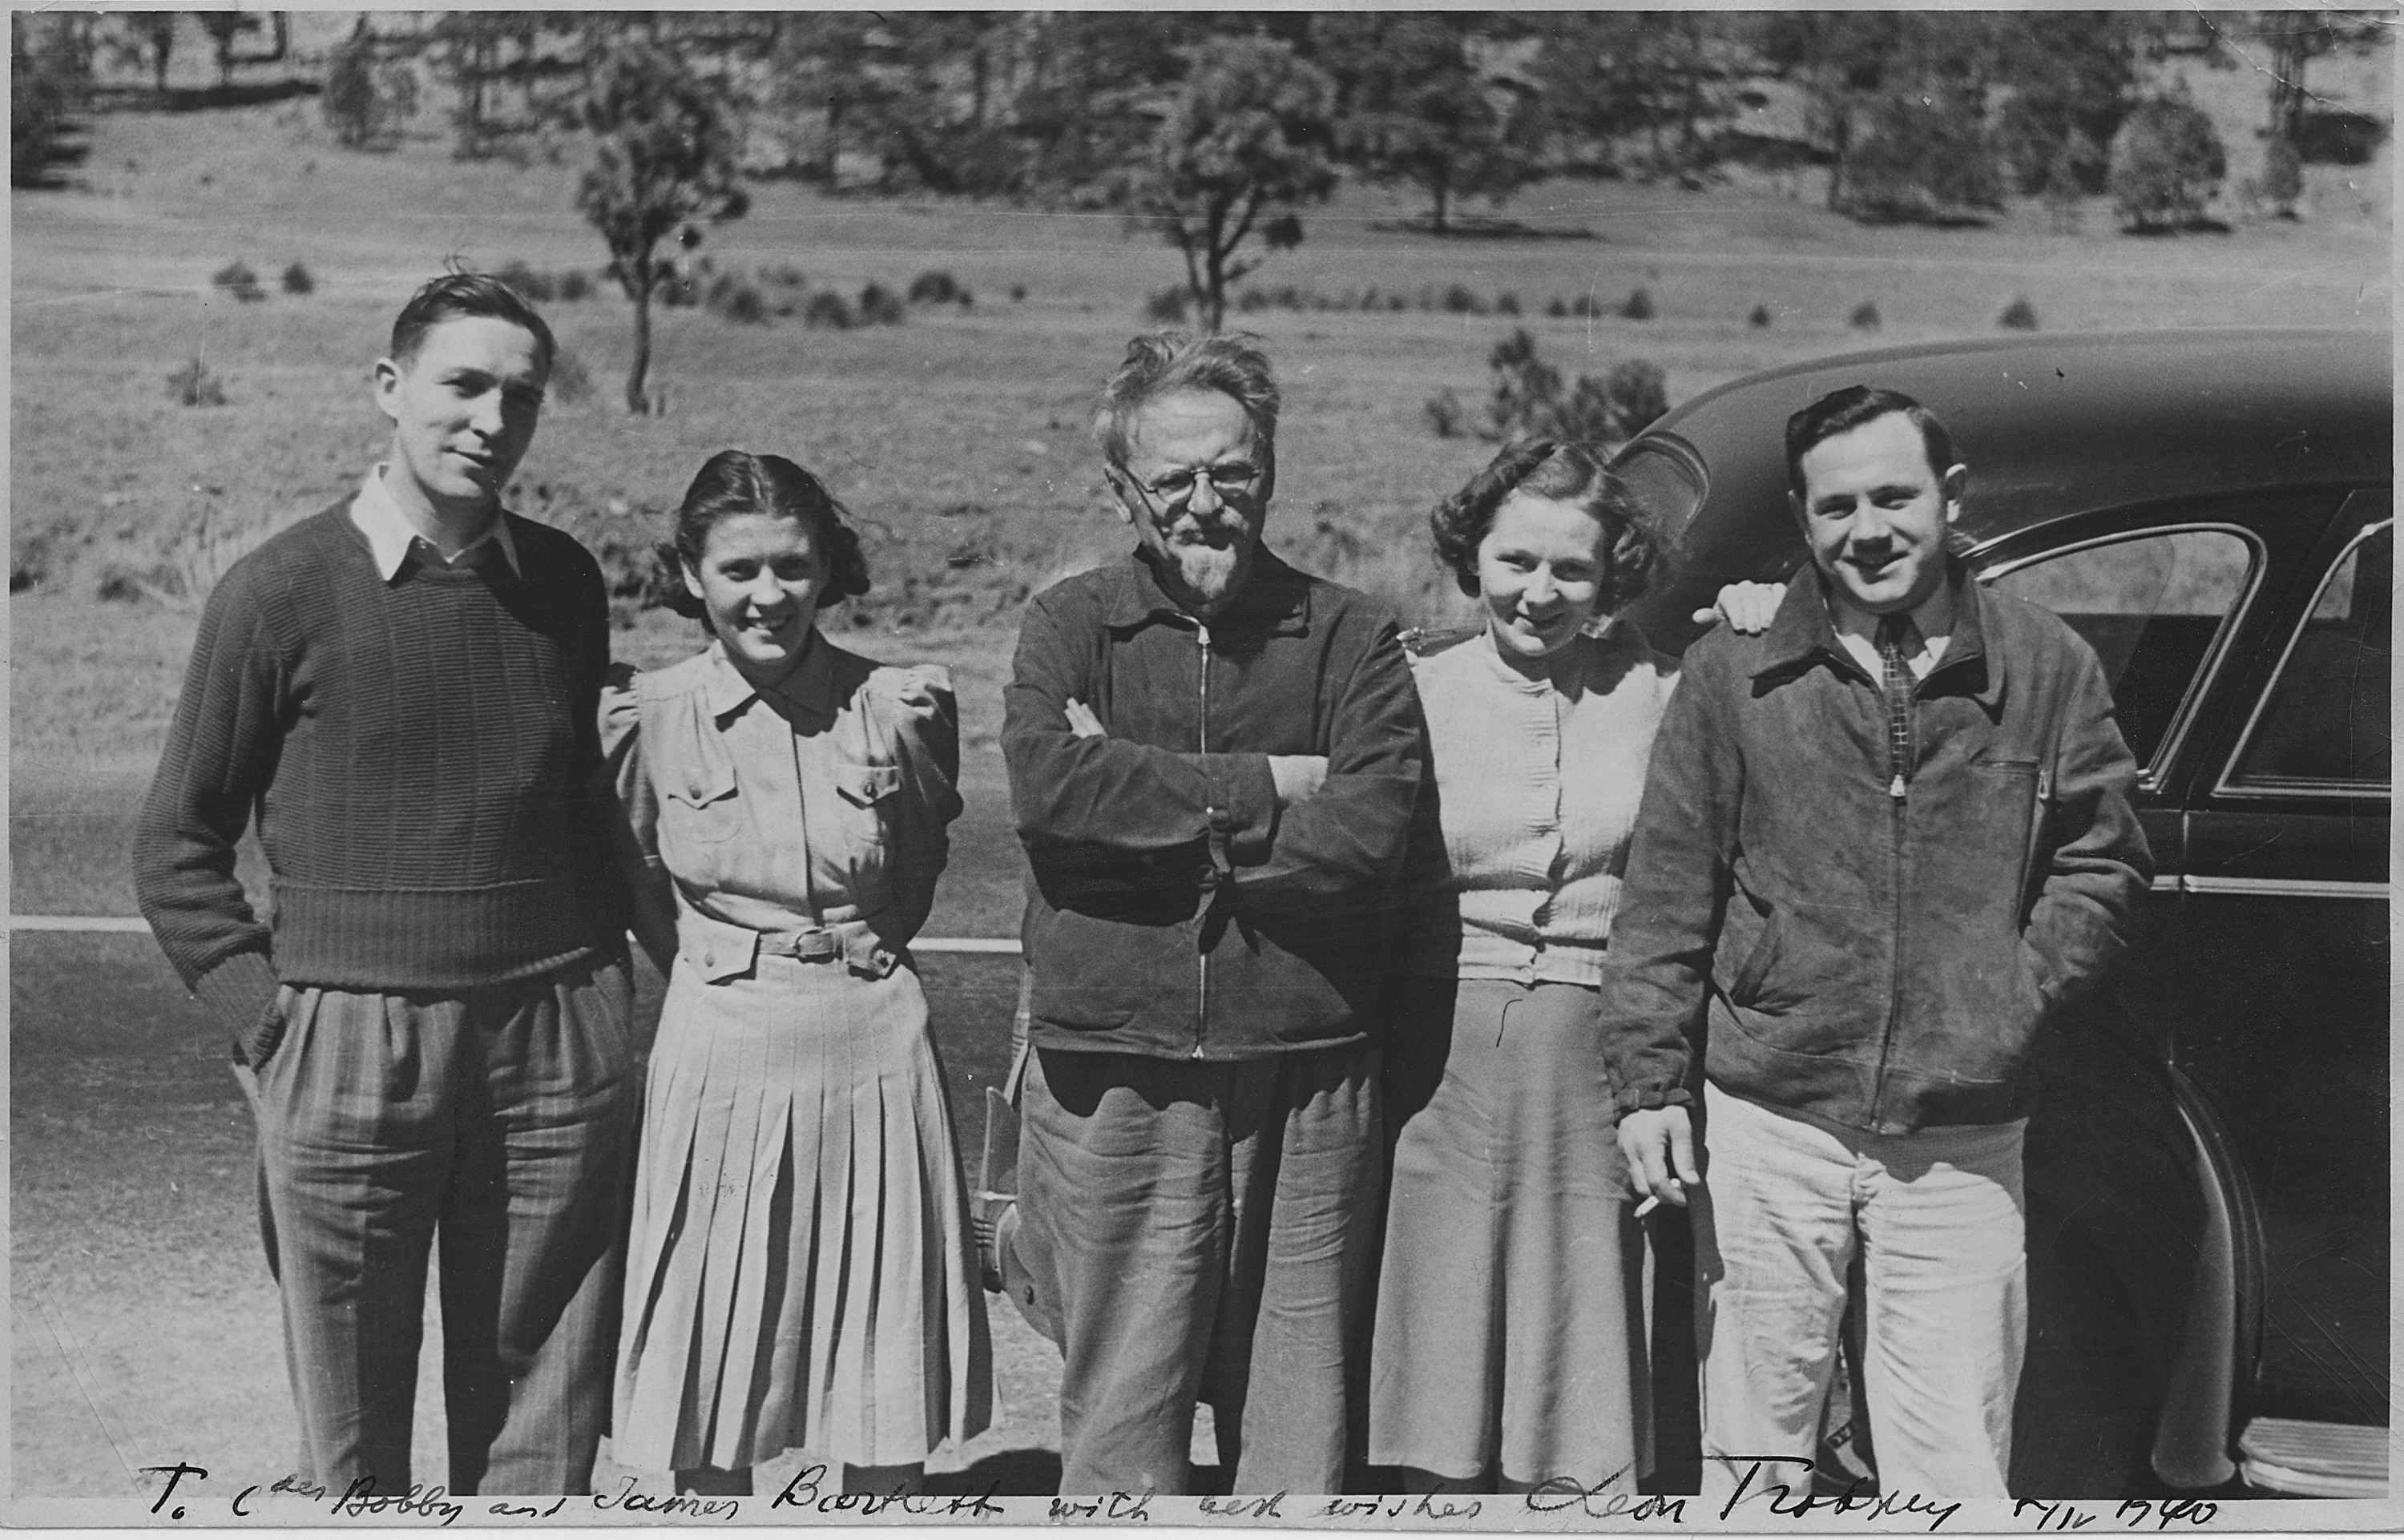 Leon Trotsky and American admirers. Mexico - NARA - 283642